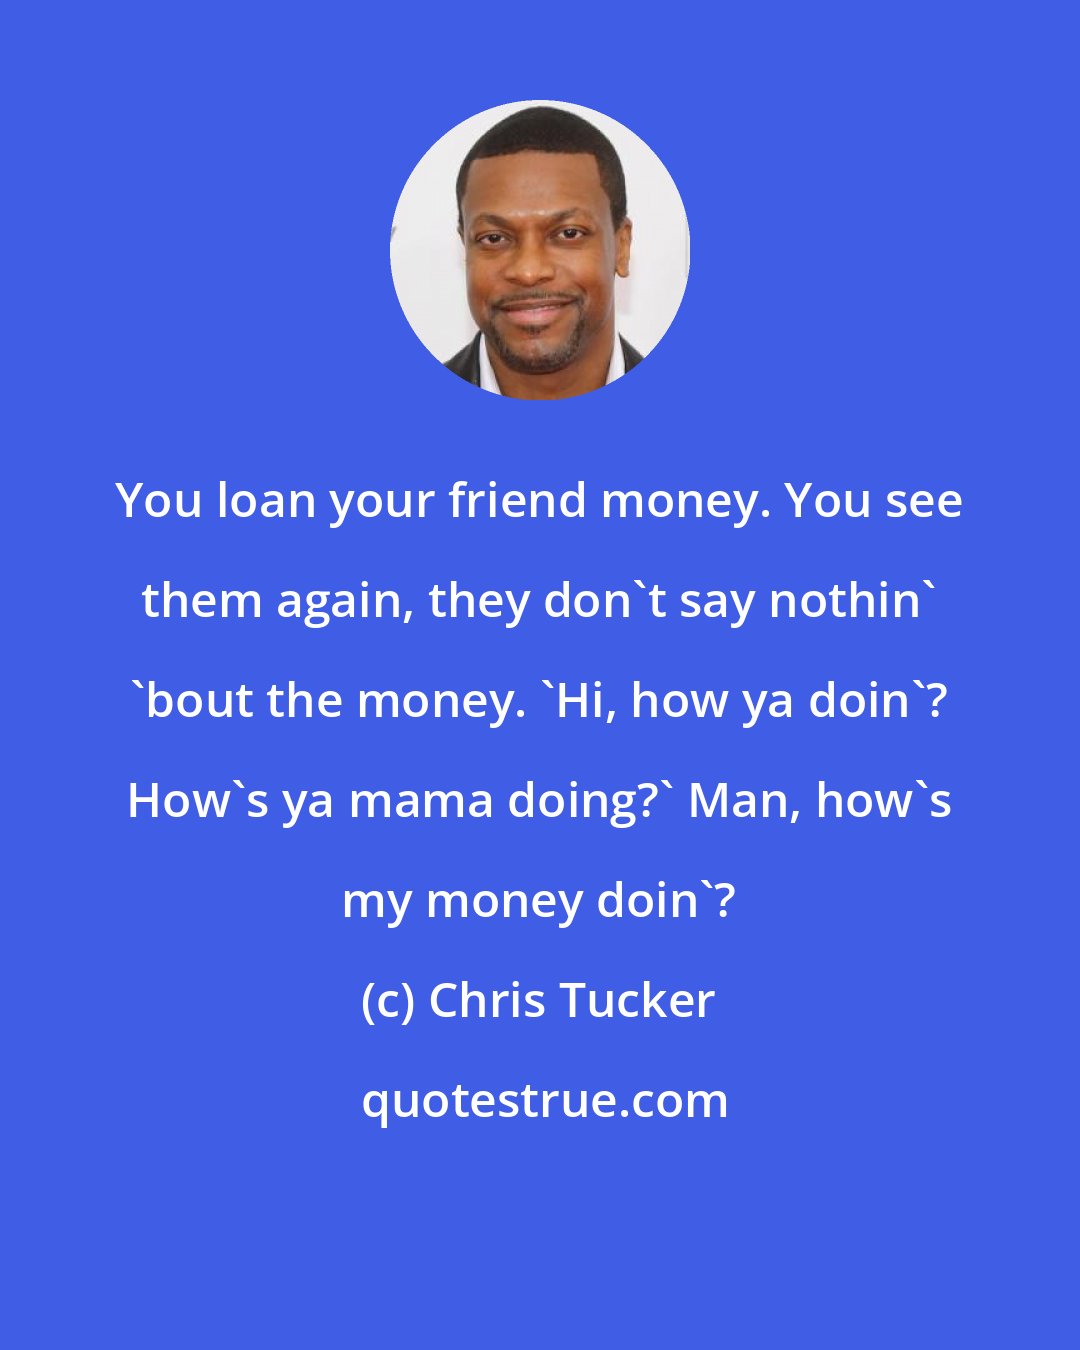 Chris Tucker: You loan your friend money. You see them again, they don't say nothin' 'bout the money. 'Hi, how ya doin'? How's ya mama doing?' Man, how's my money doin'?